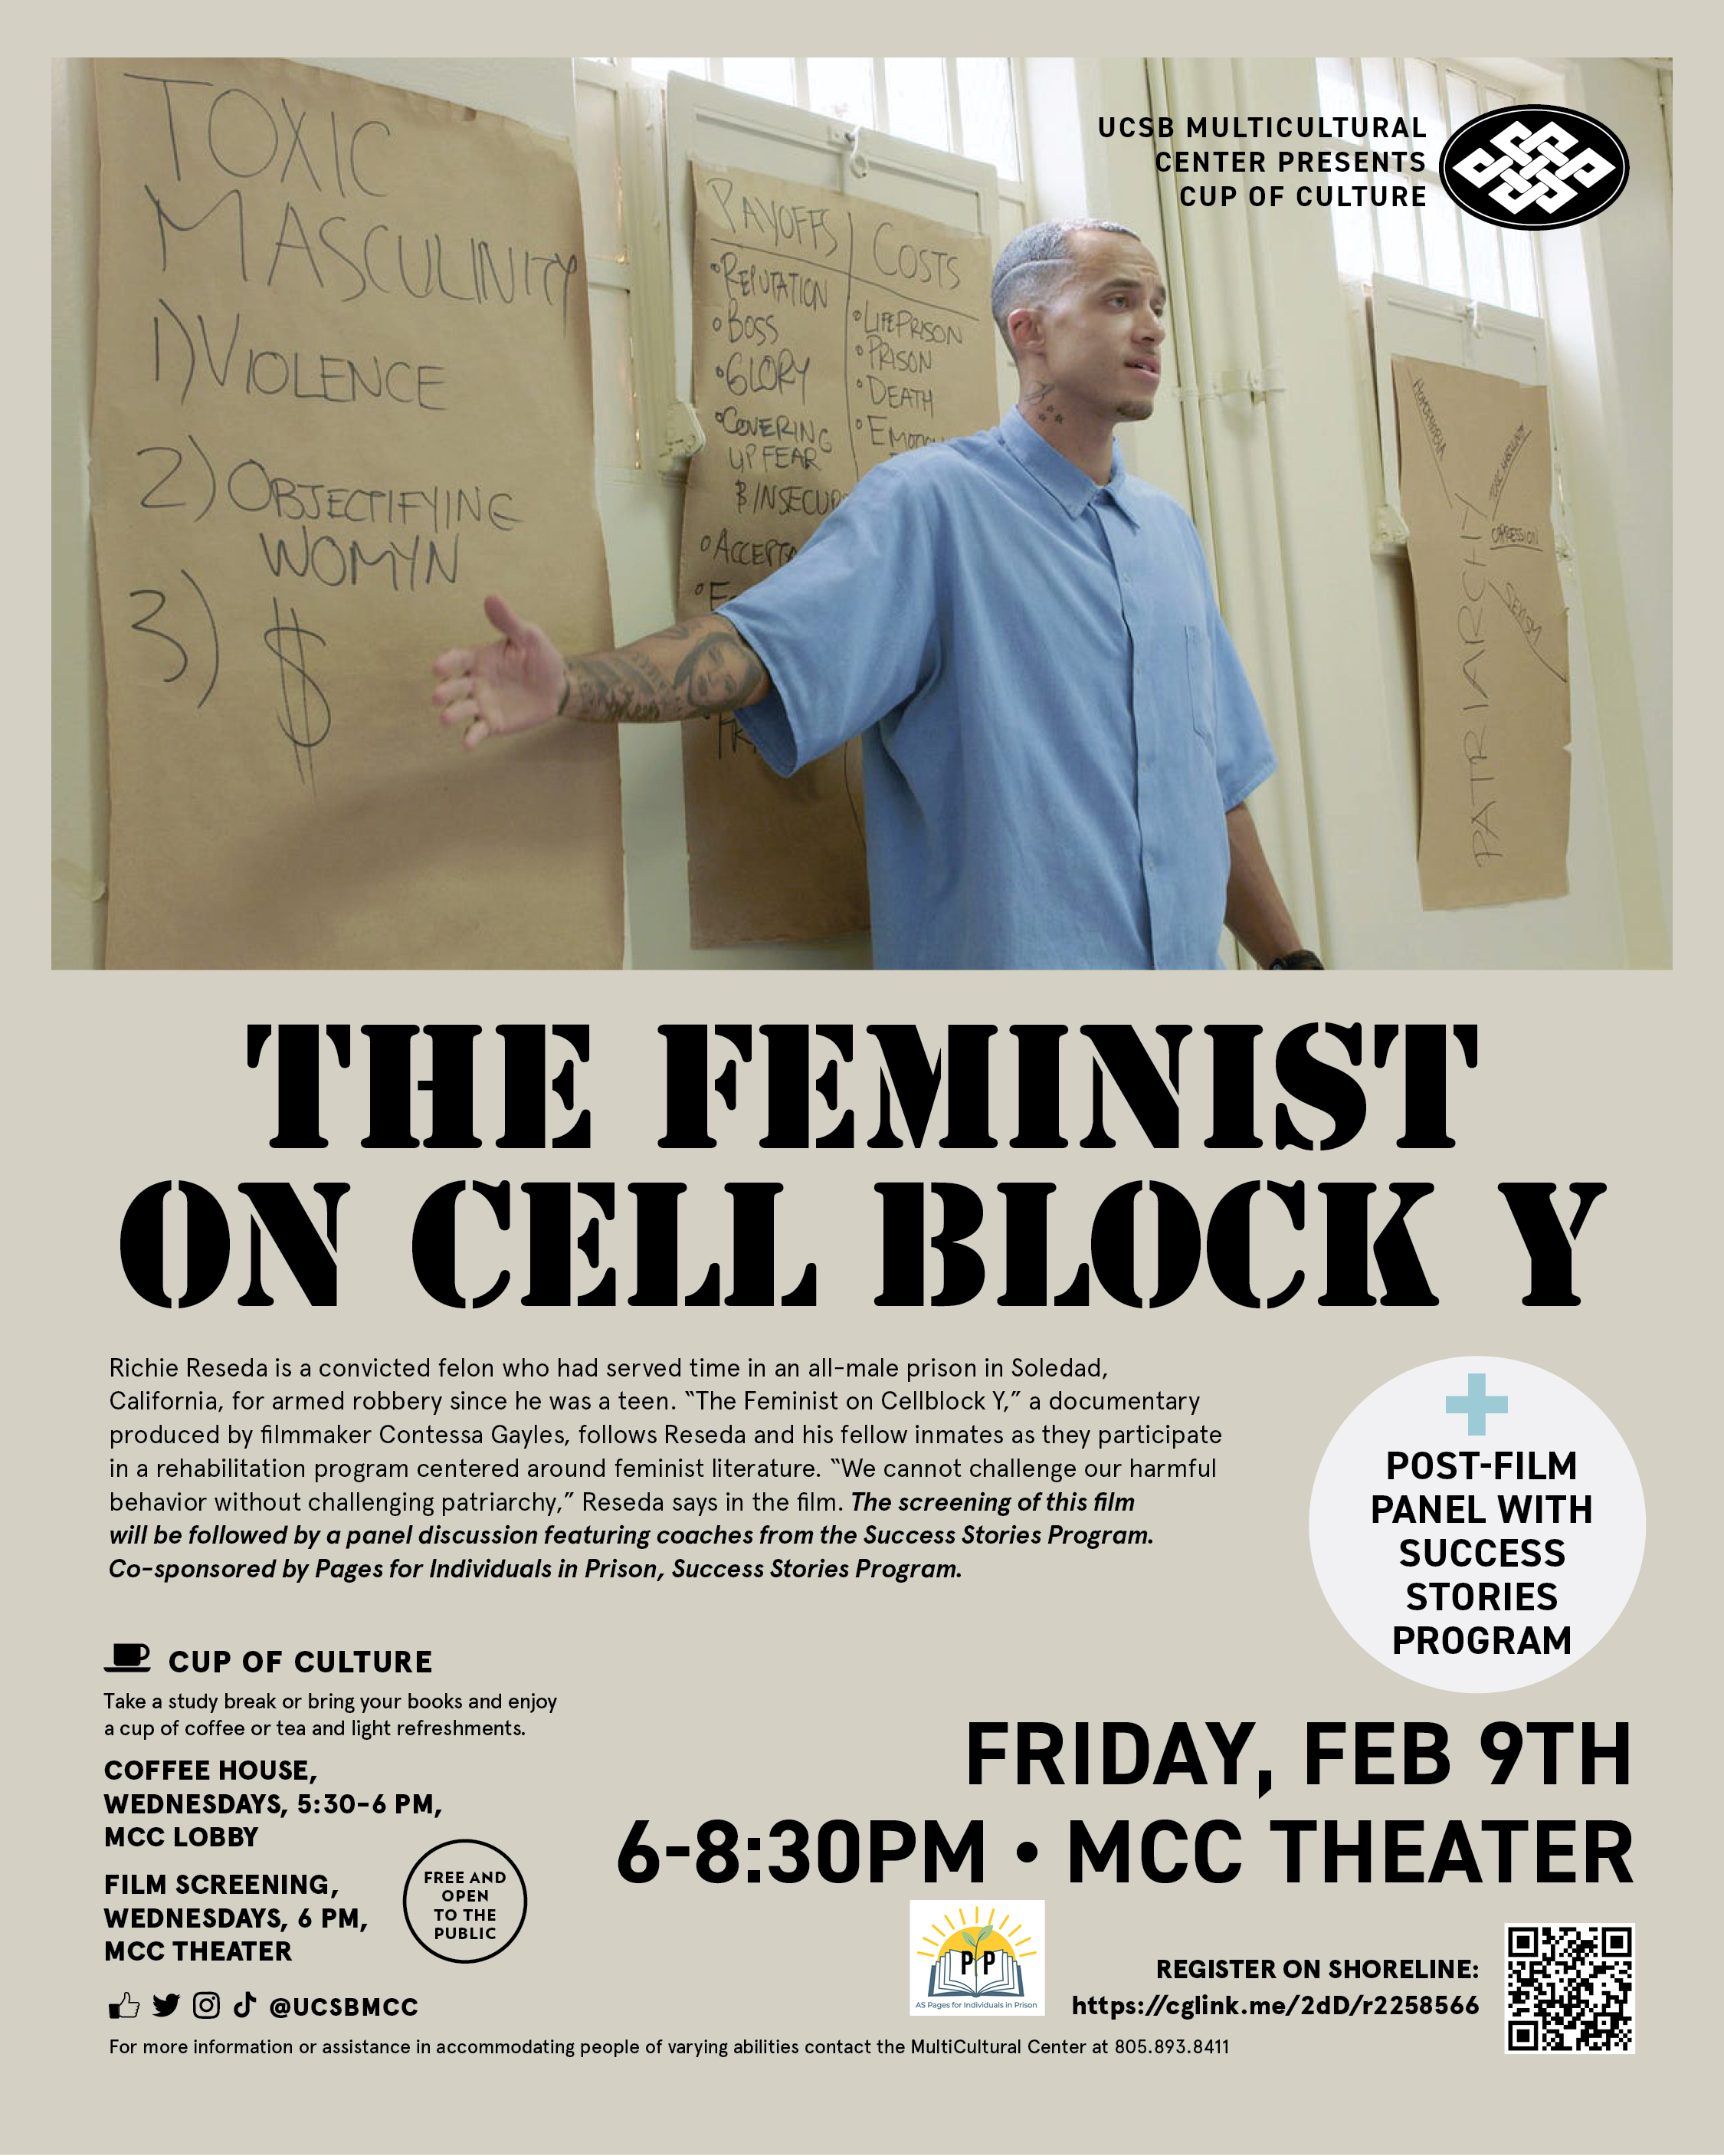 Feminist on Cell Block Y